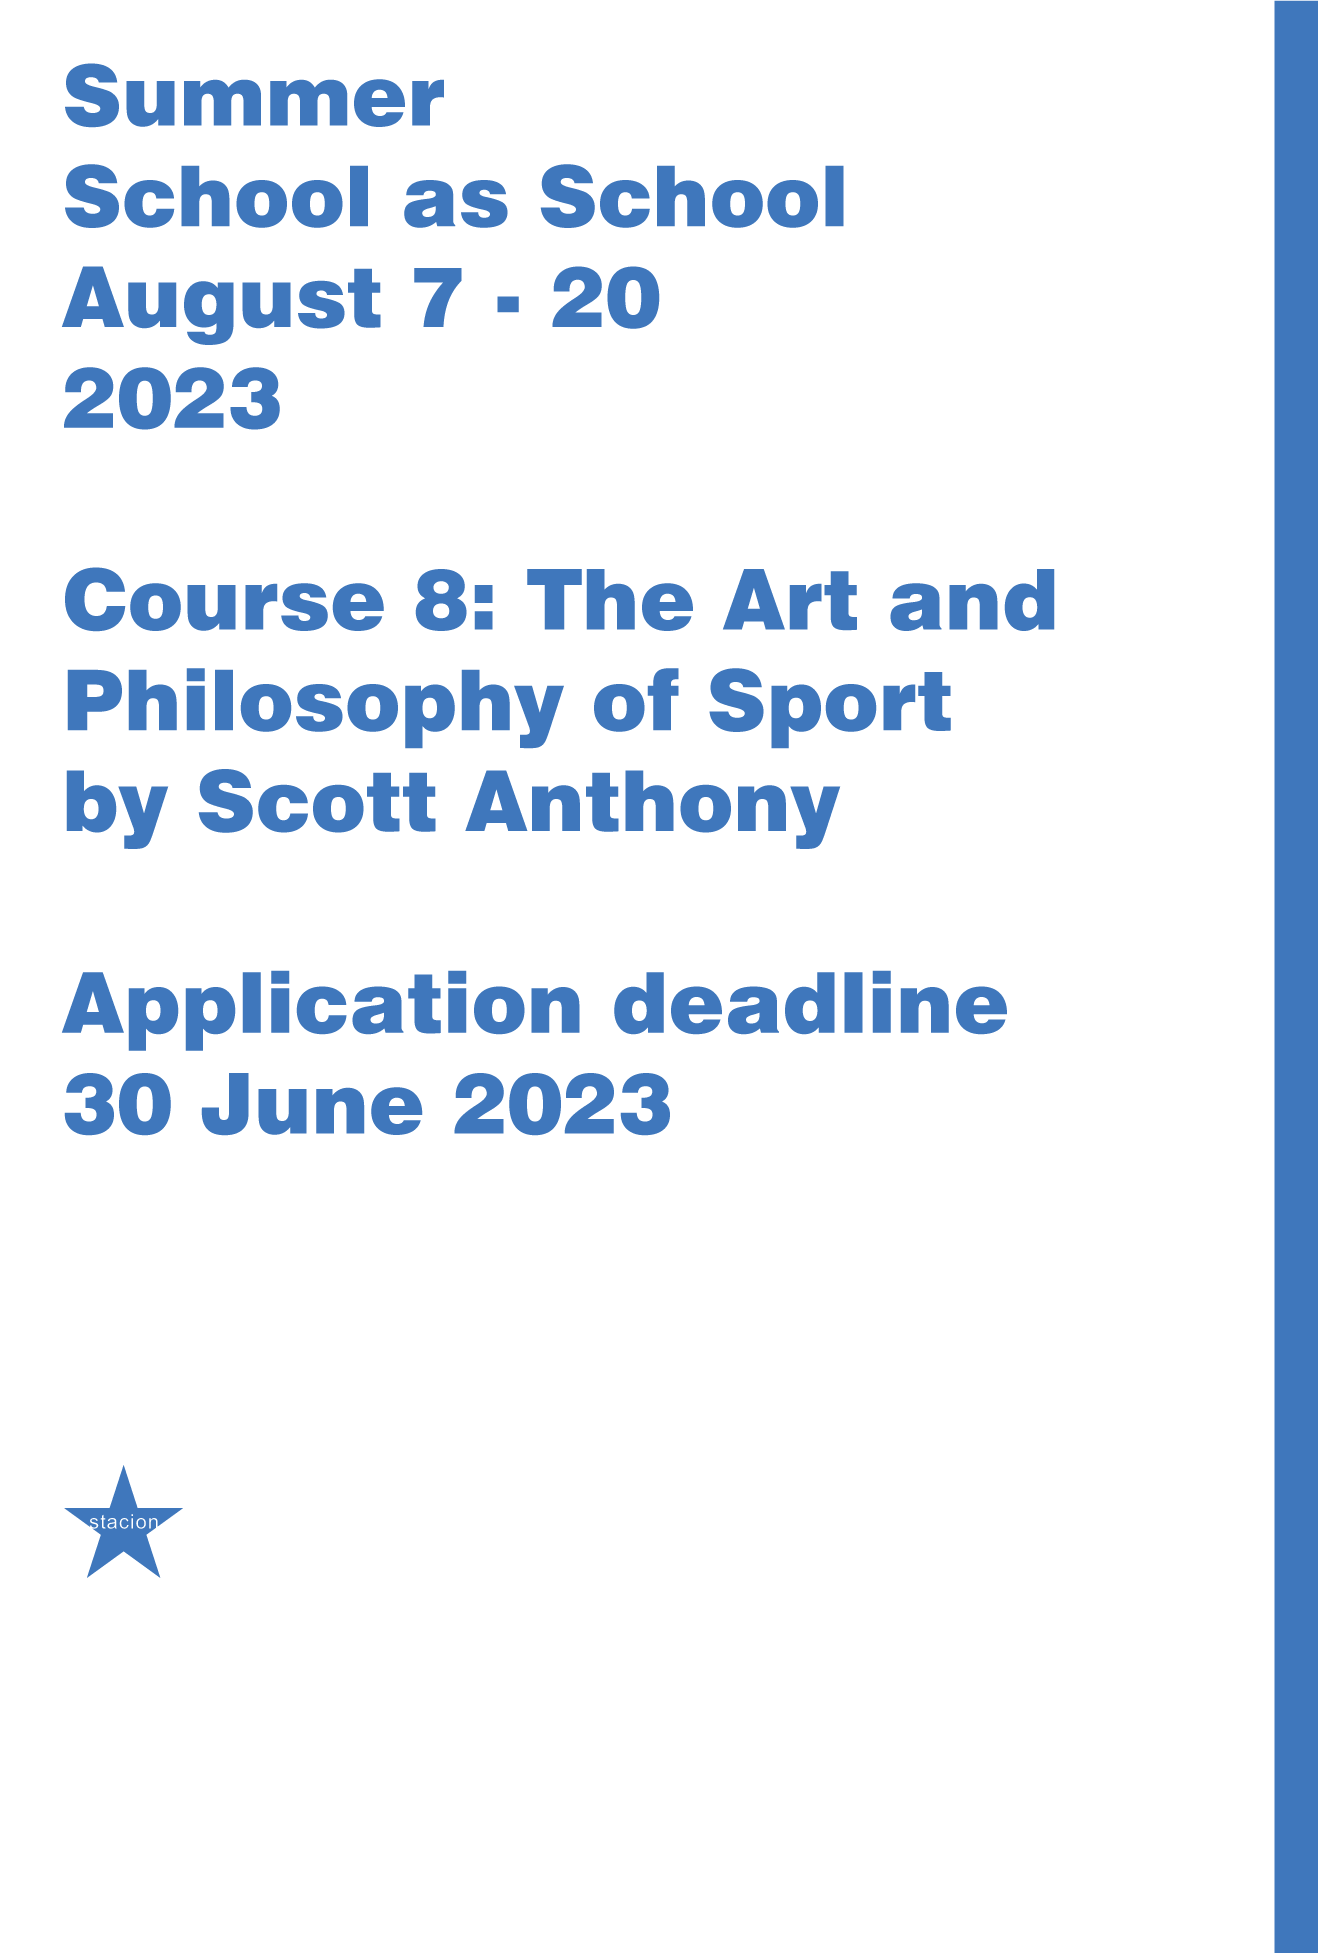 Course 8: The Art and Philosophy of Sport